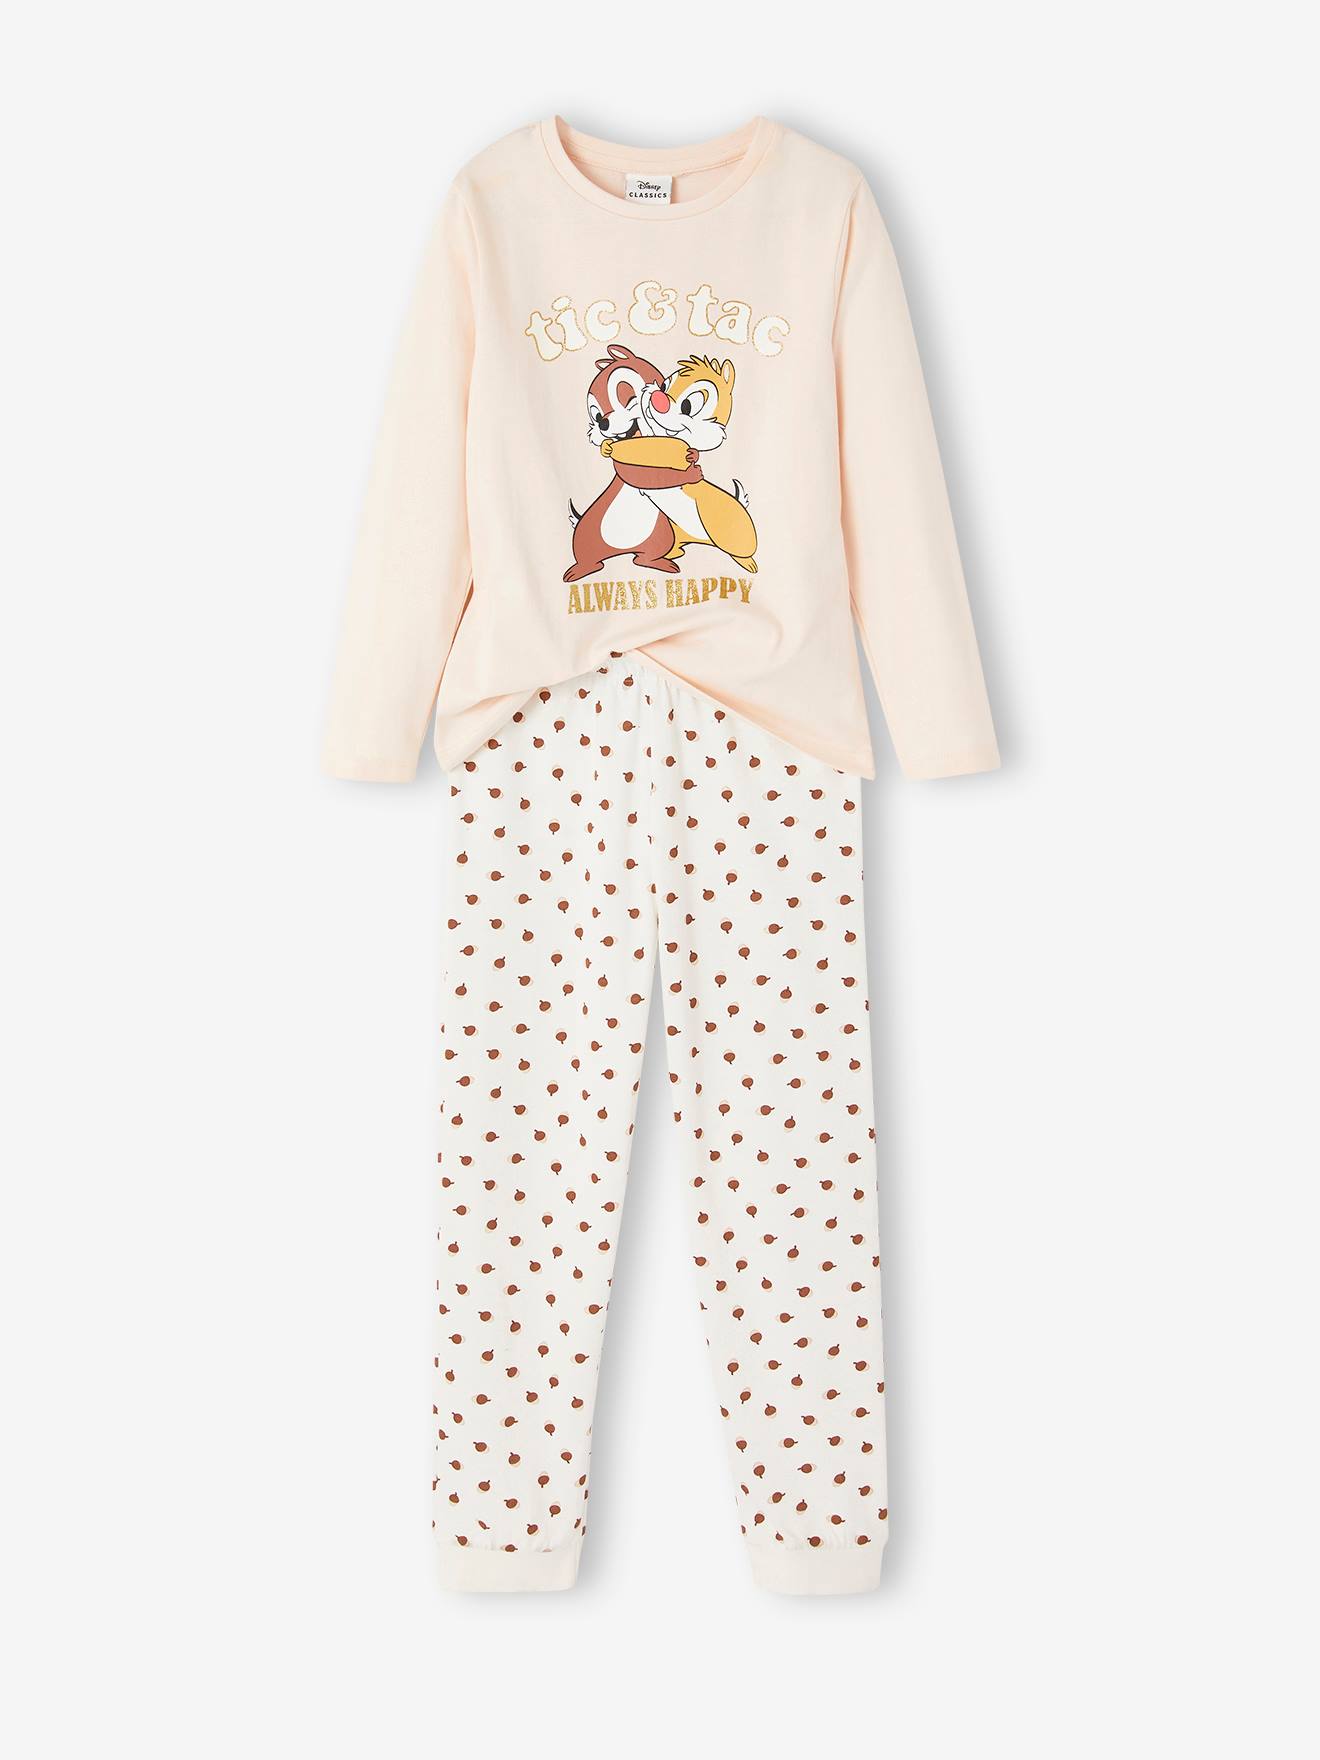 Pyjamas for Girls, Chip n’Dale by Disney(r) pale pink